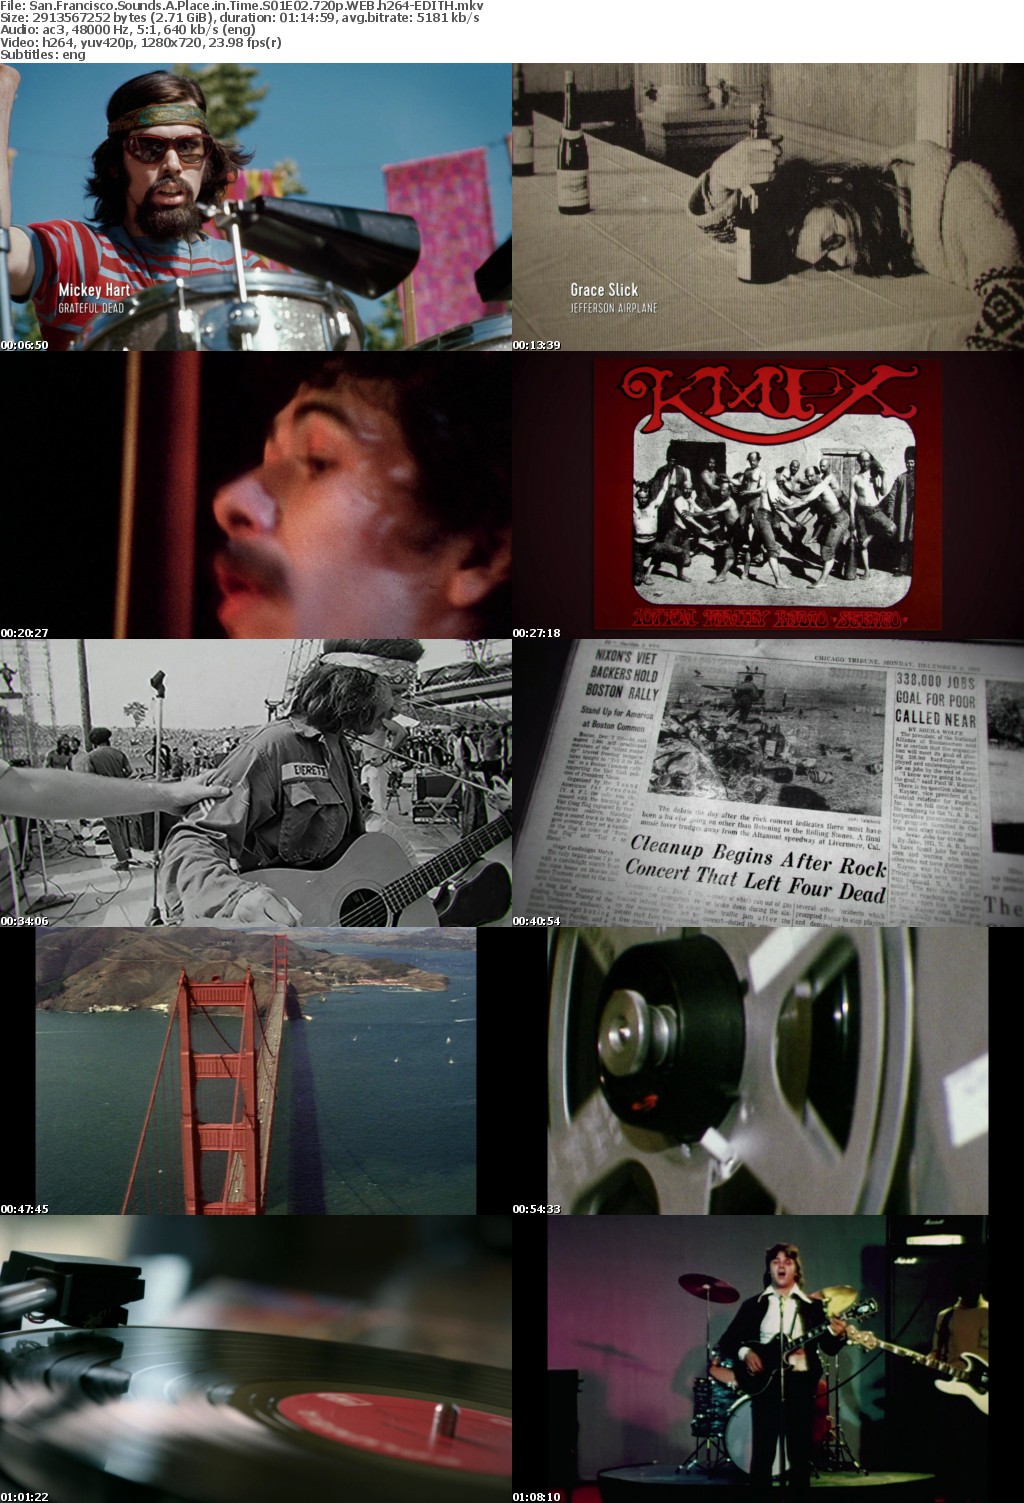 San Francisco Sounds A Place in Time S01E02 720p WEB h264-EDITH